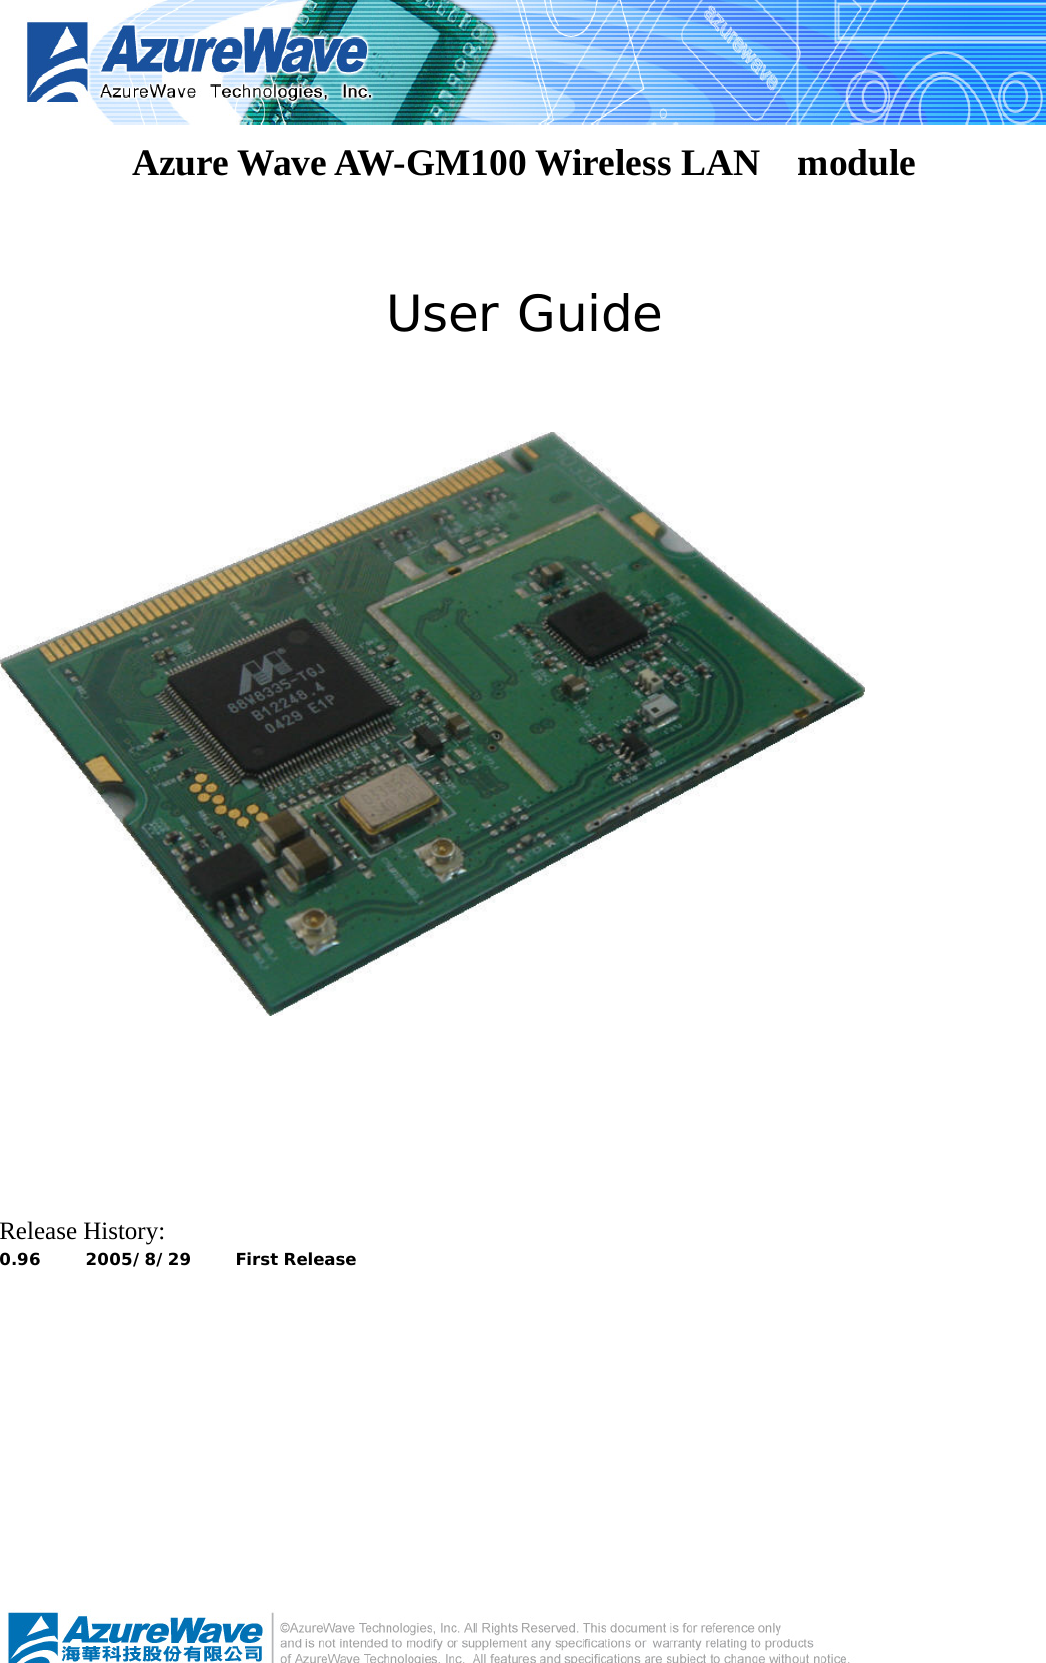   Azure Wave AW-GM100 Wireless LAN  module  User Guide         Release History: 0.96 2005/8/29 First Release     